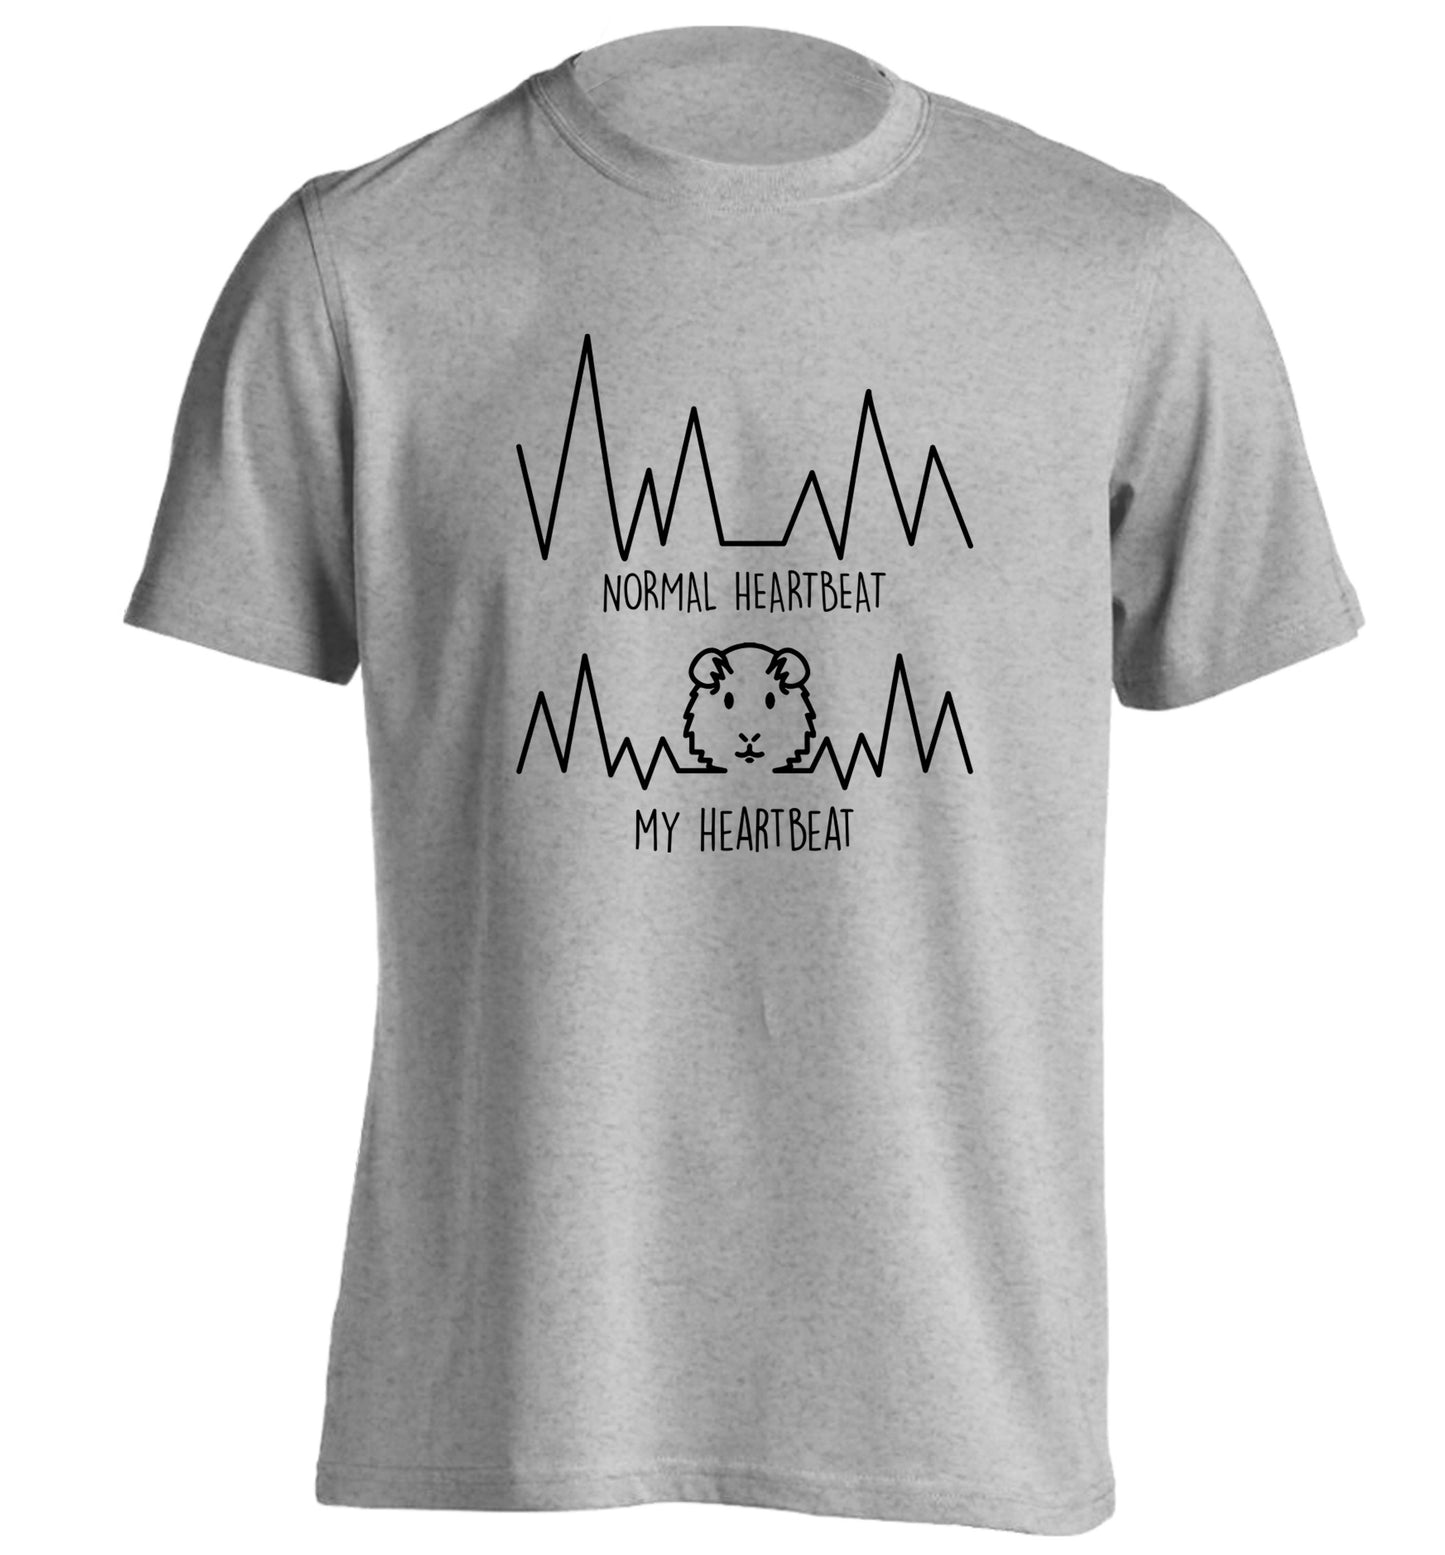 Normal heartbeat vs my heartbeat guinea pig lover adults unisex grey Tshirt 2XL